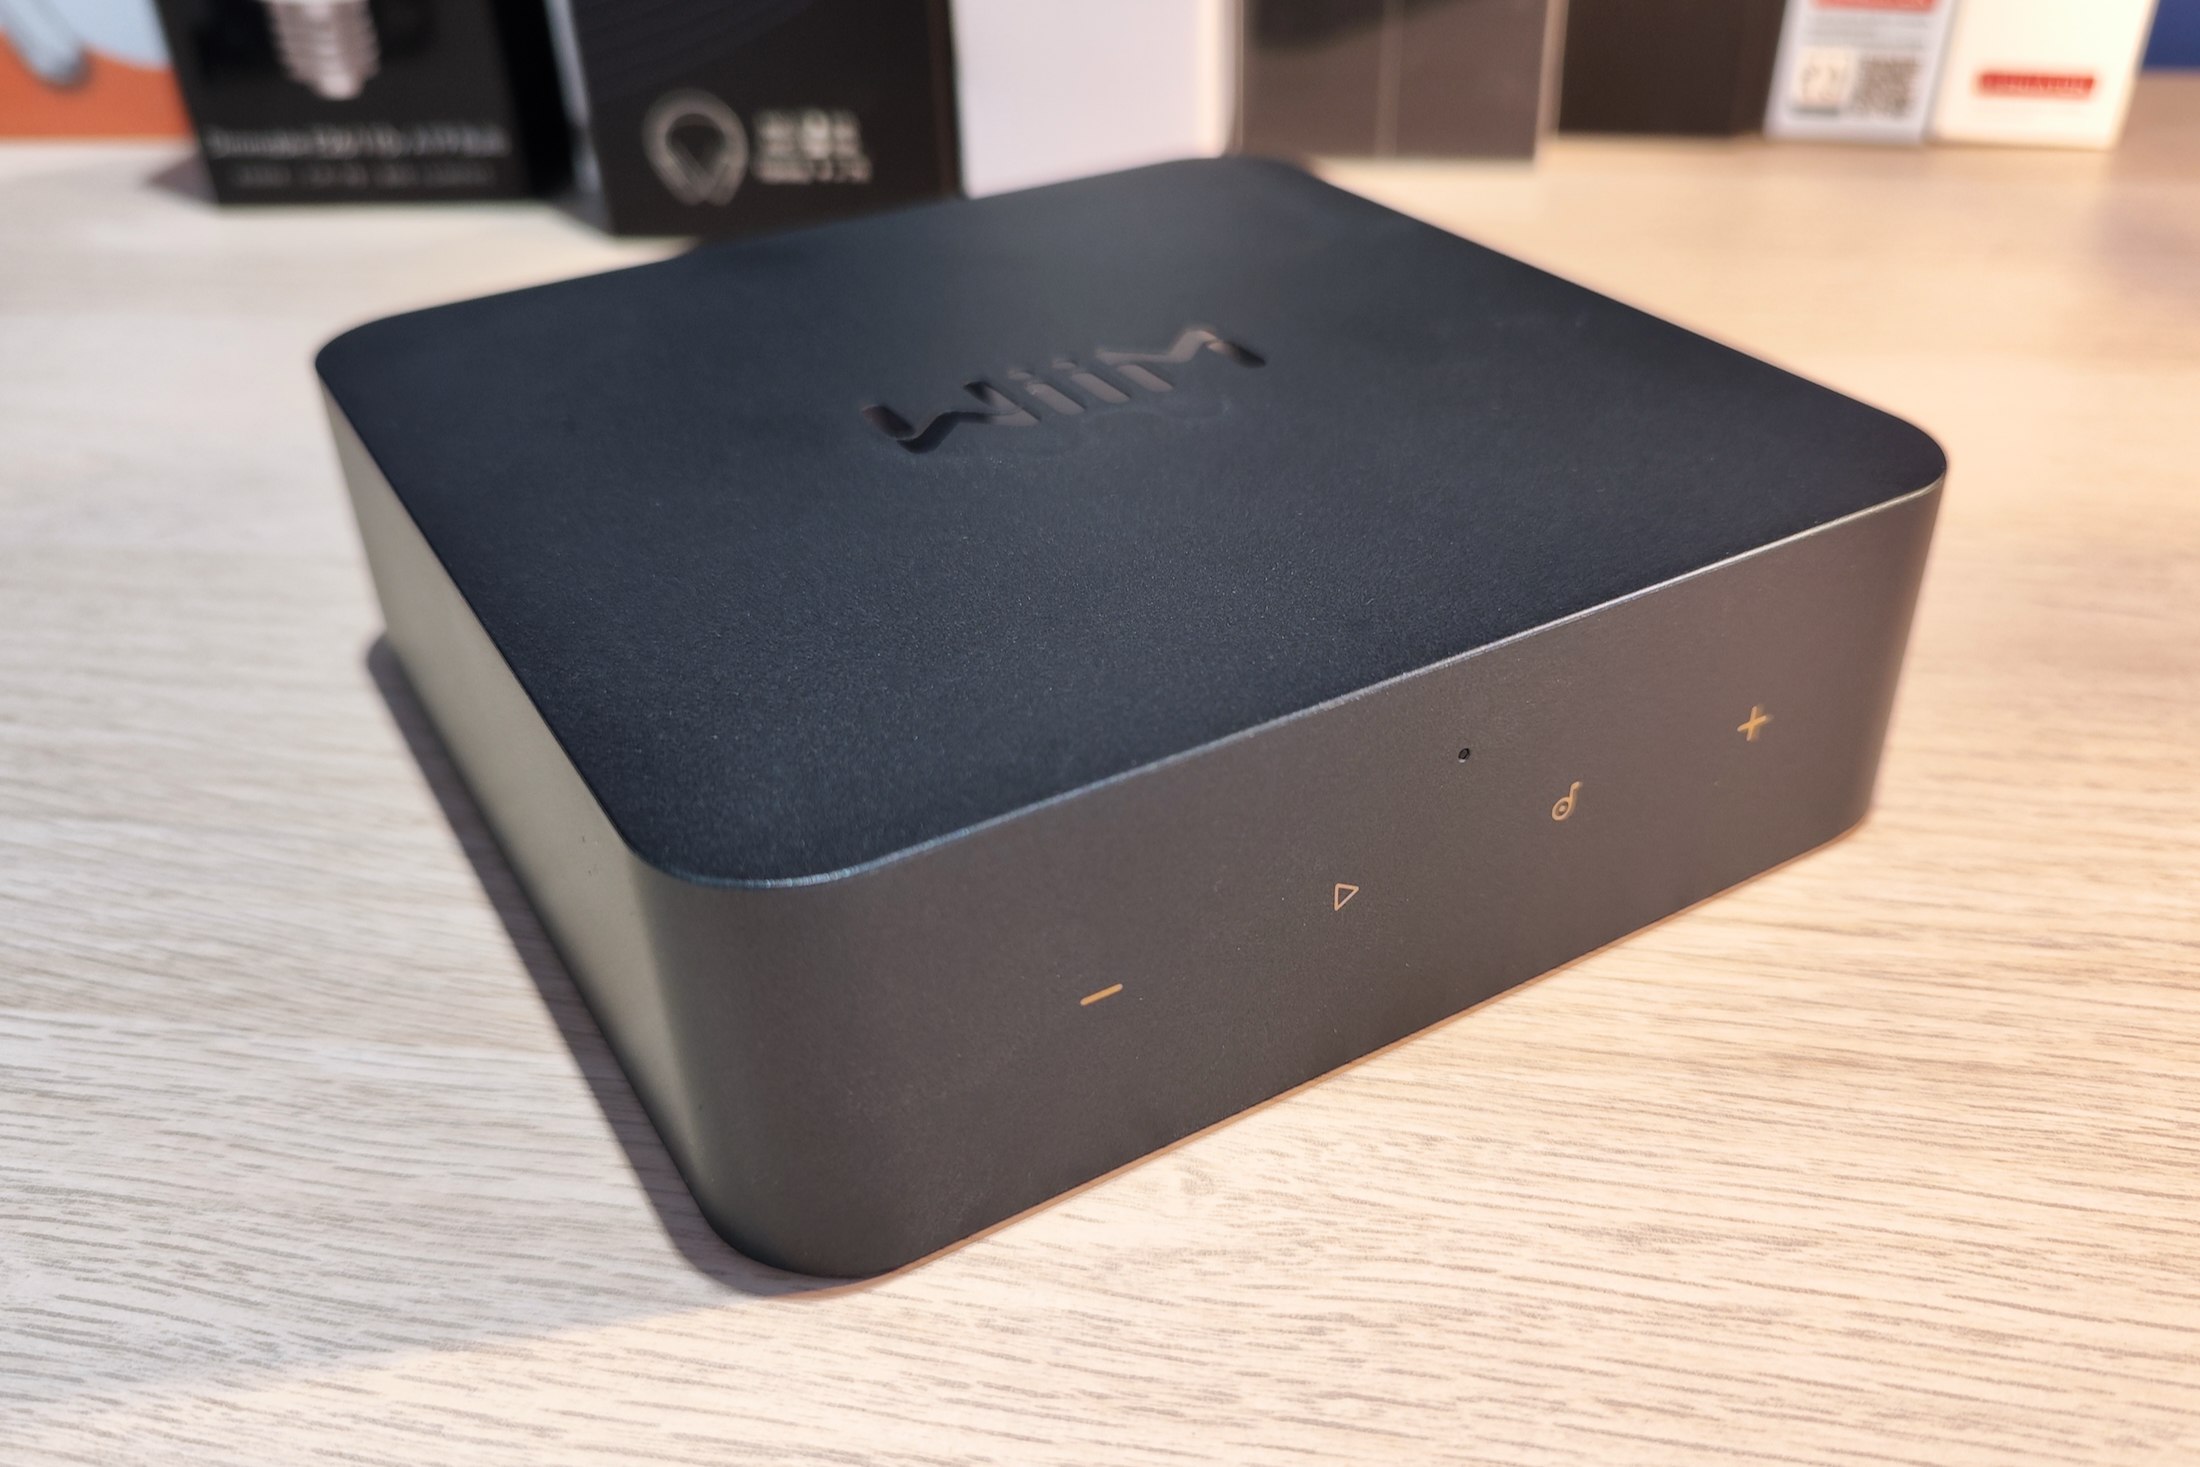 Wiim Pro review: this could be Sonos' worst nightmare